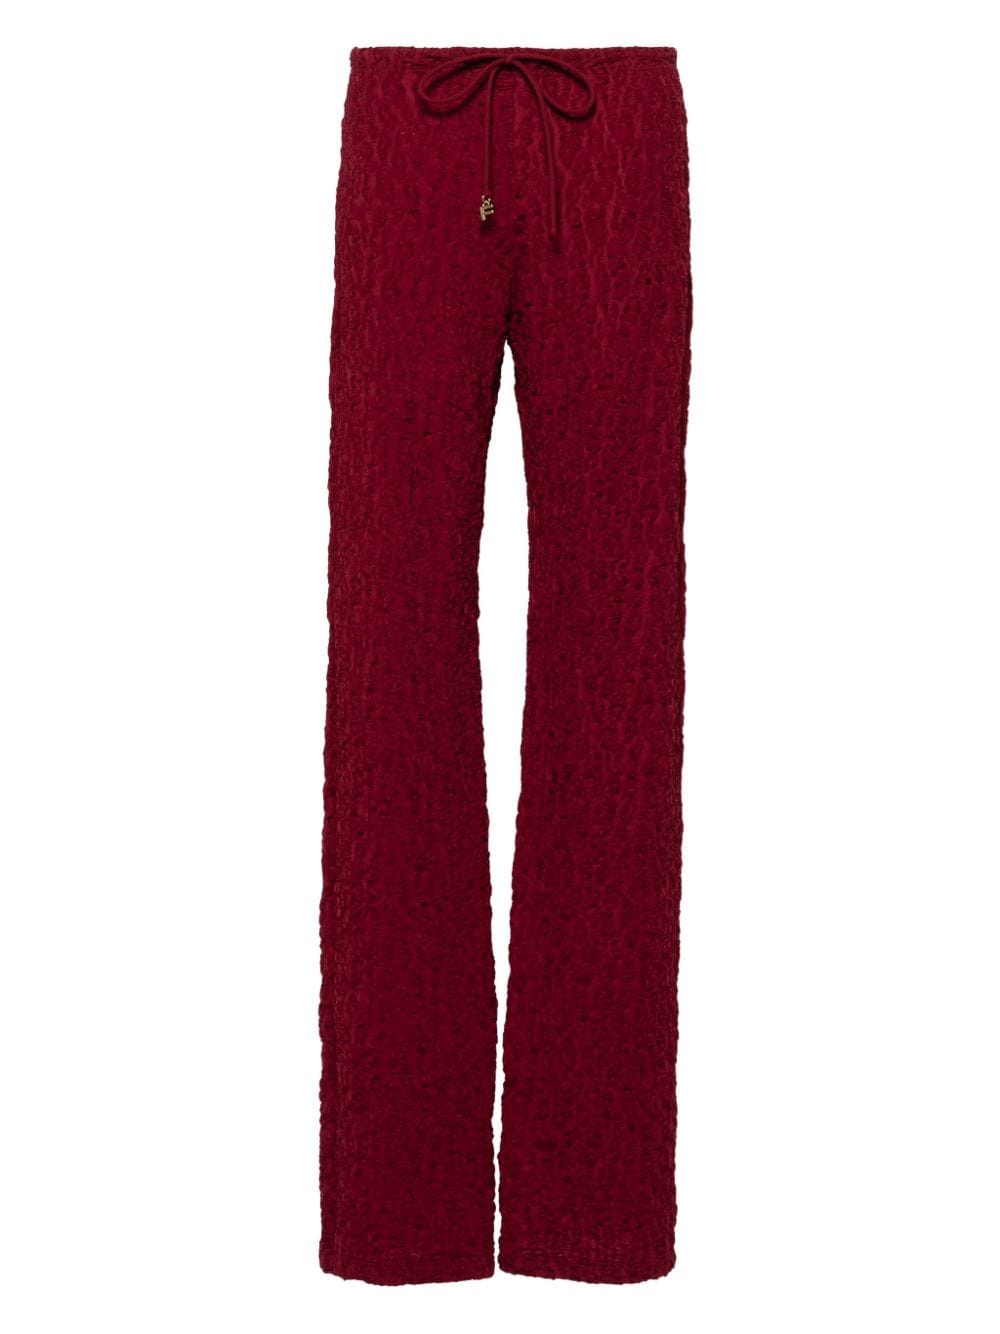 cloqué-effect straight trousers